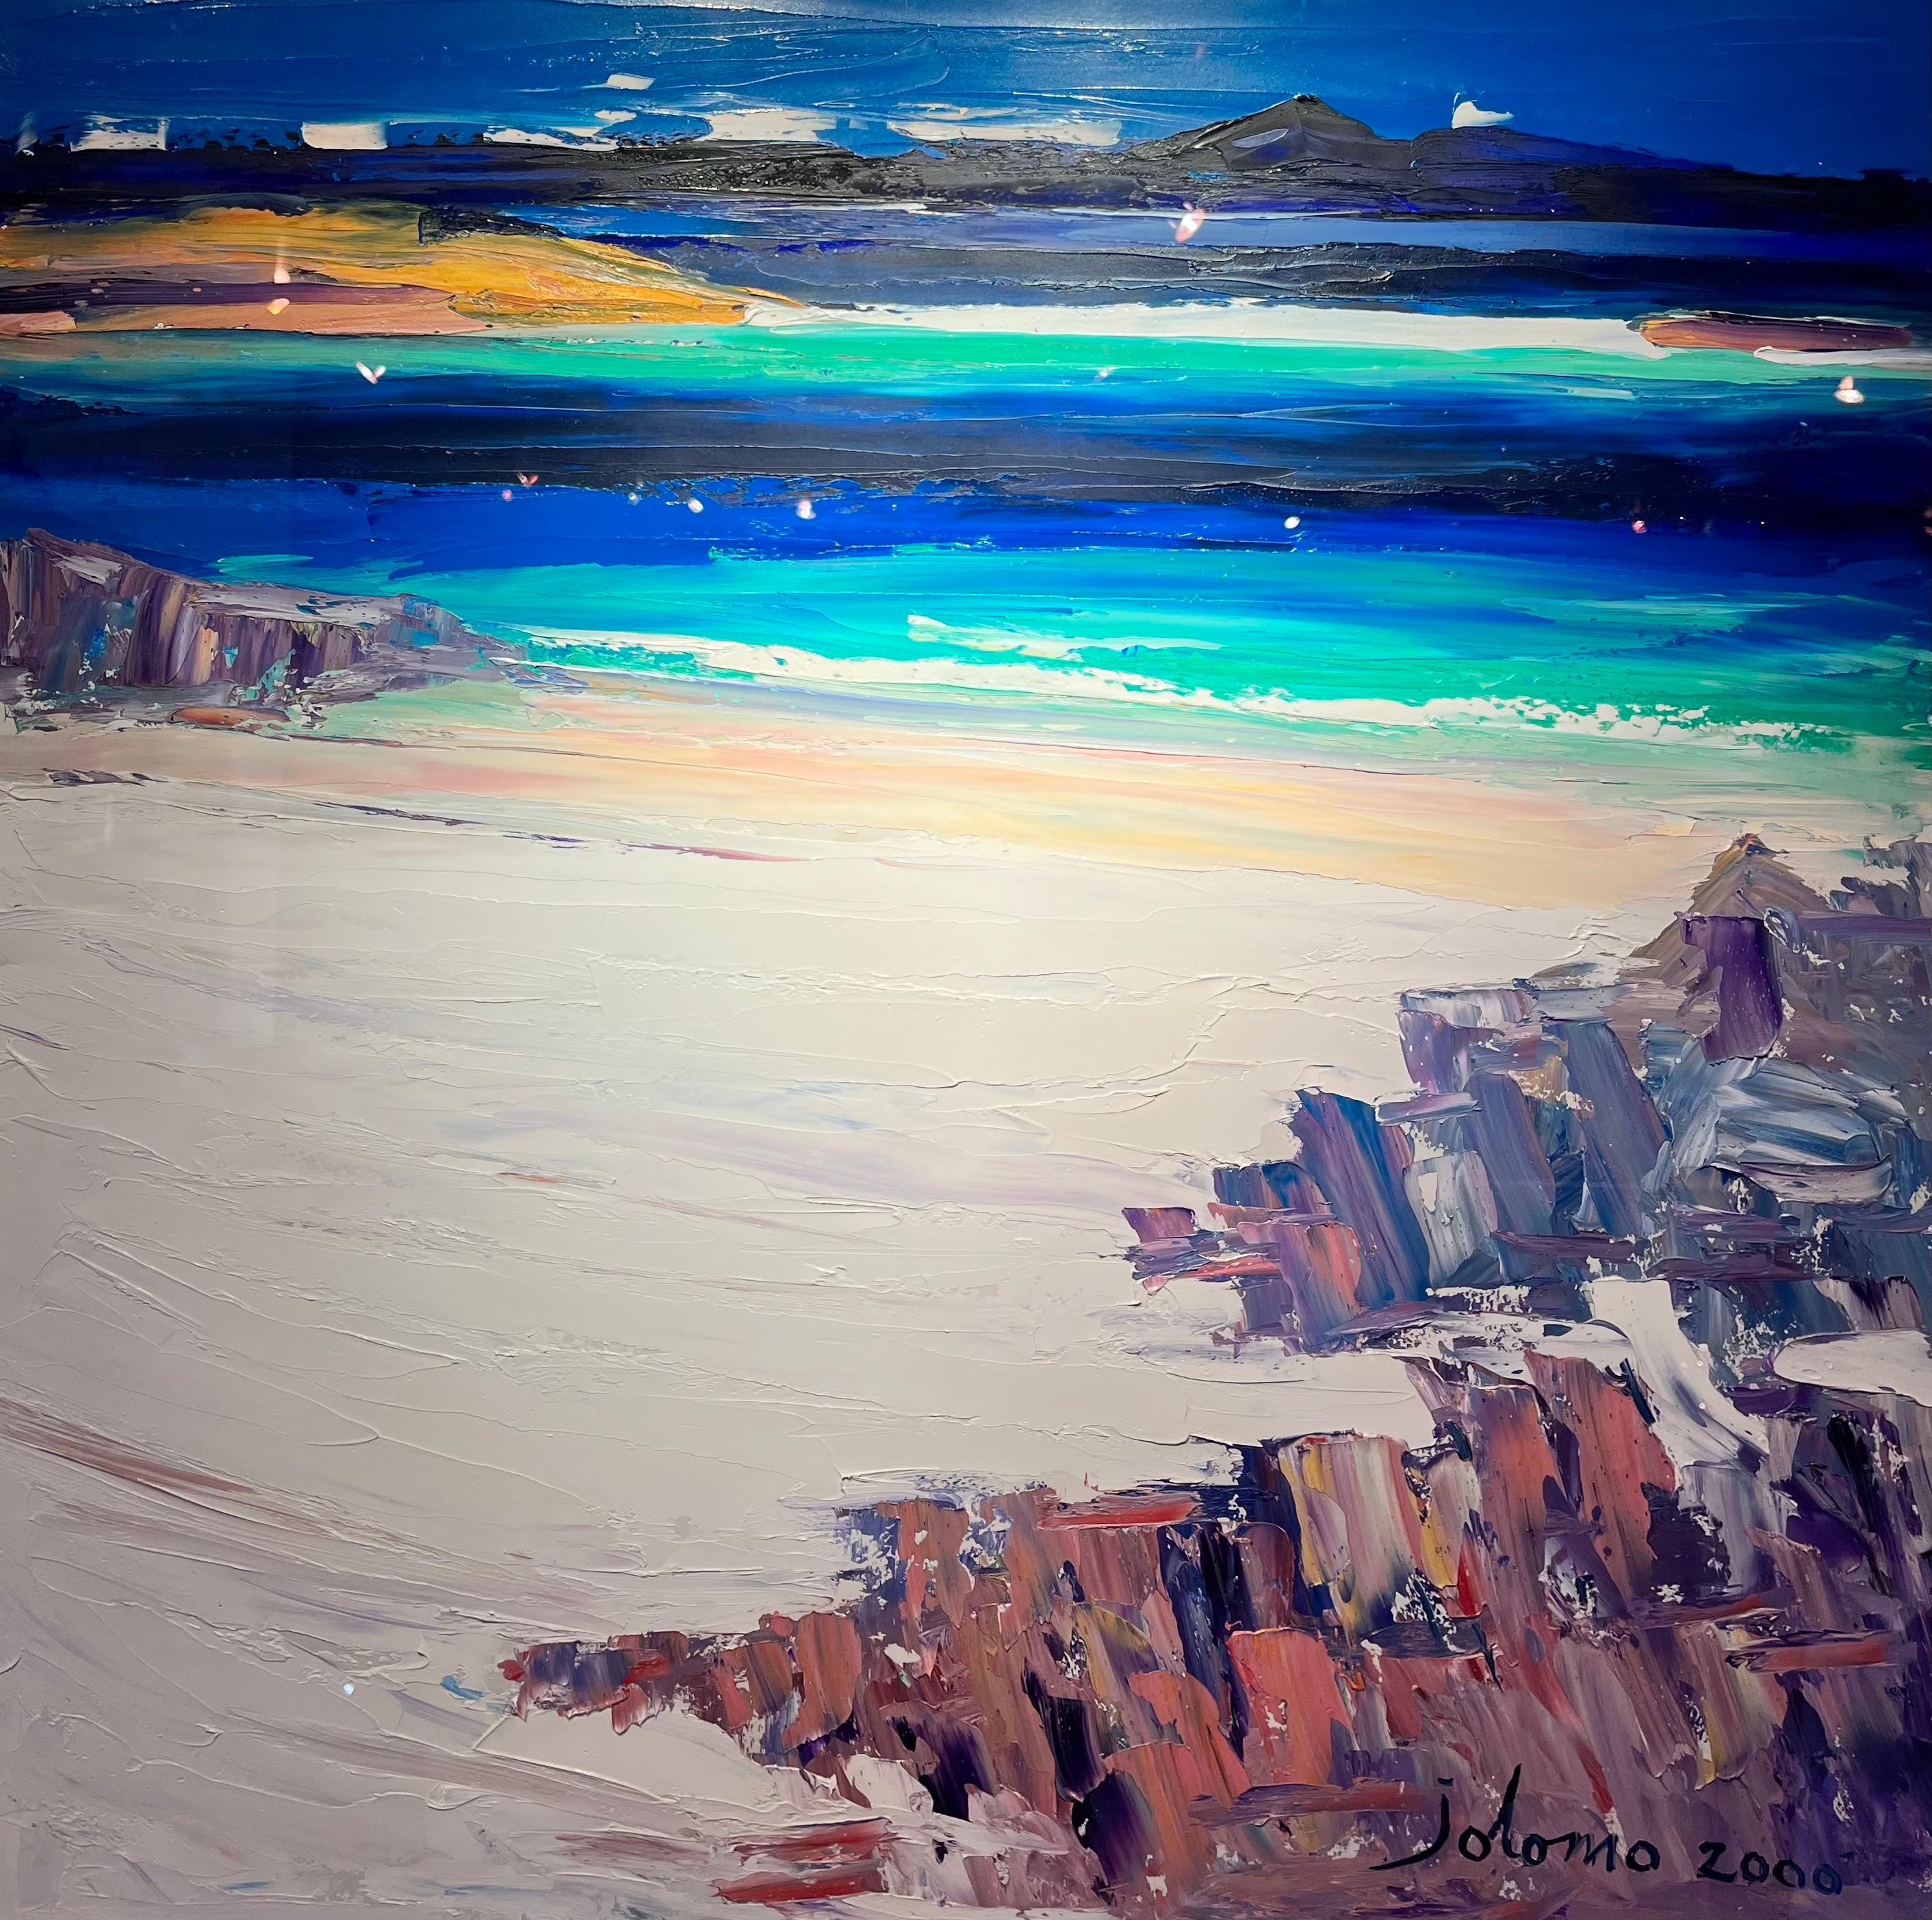 'White Beach Iona' Scottish seascape painting of a beach, blue sea, rocks - Painting by John Lowrie Morrison